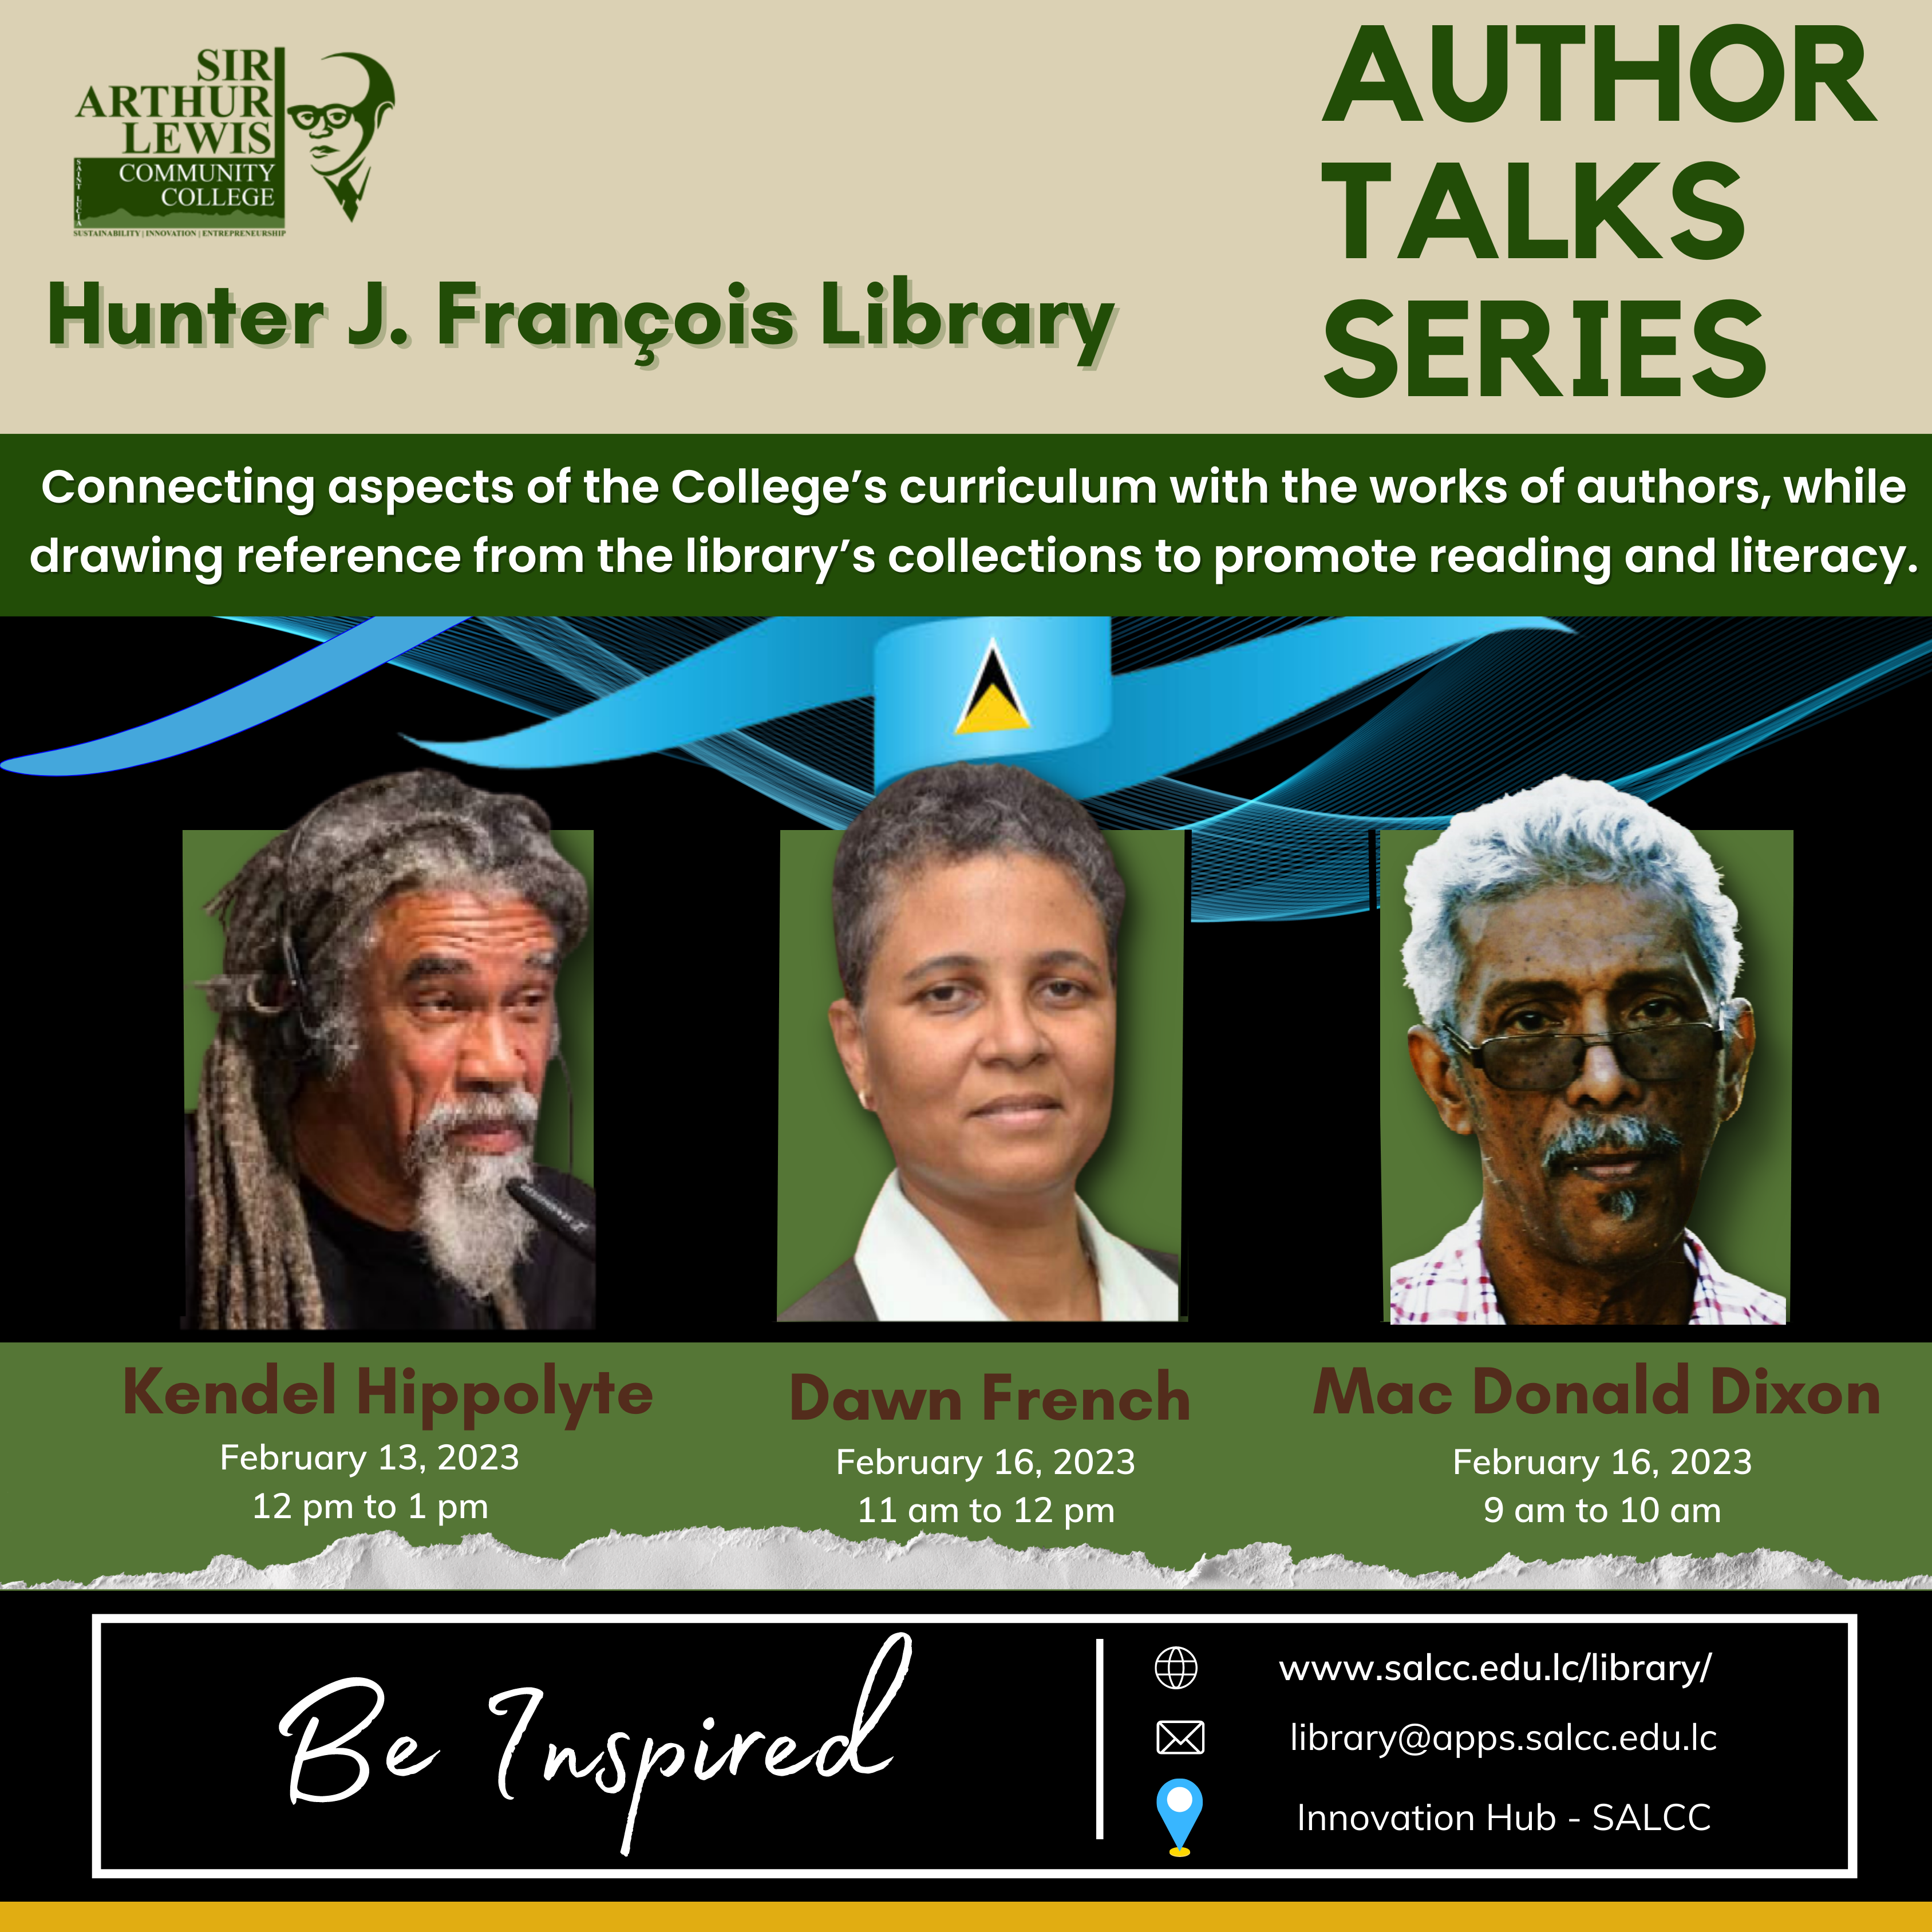 The Hunter J. François Library hosts its first installment of the AUTHOR TALKS series.